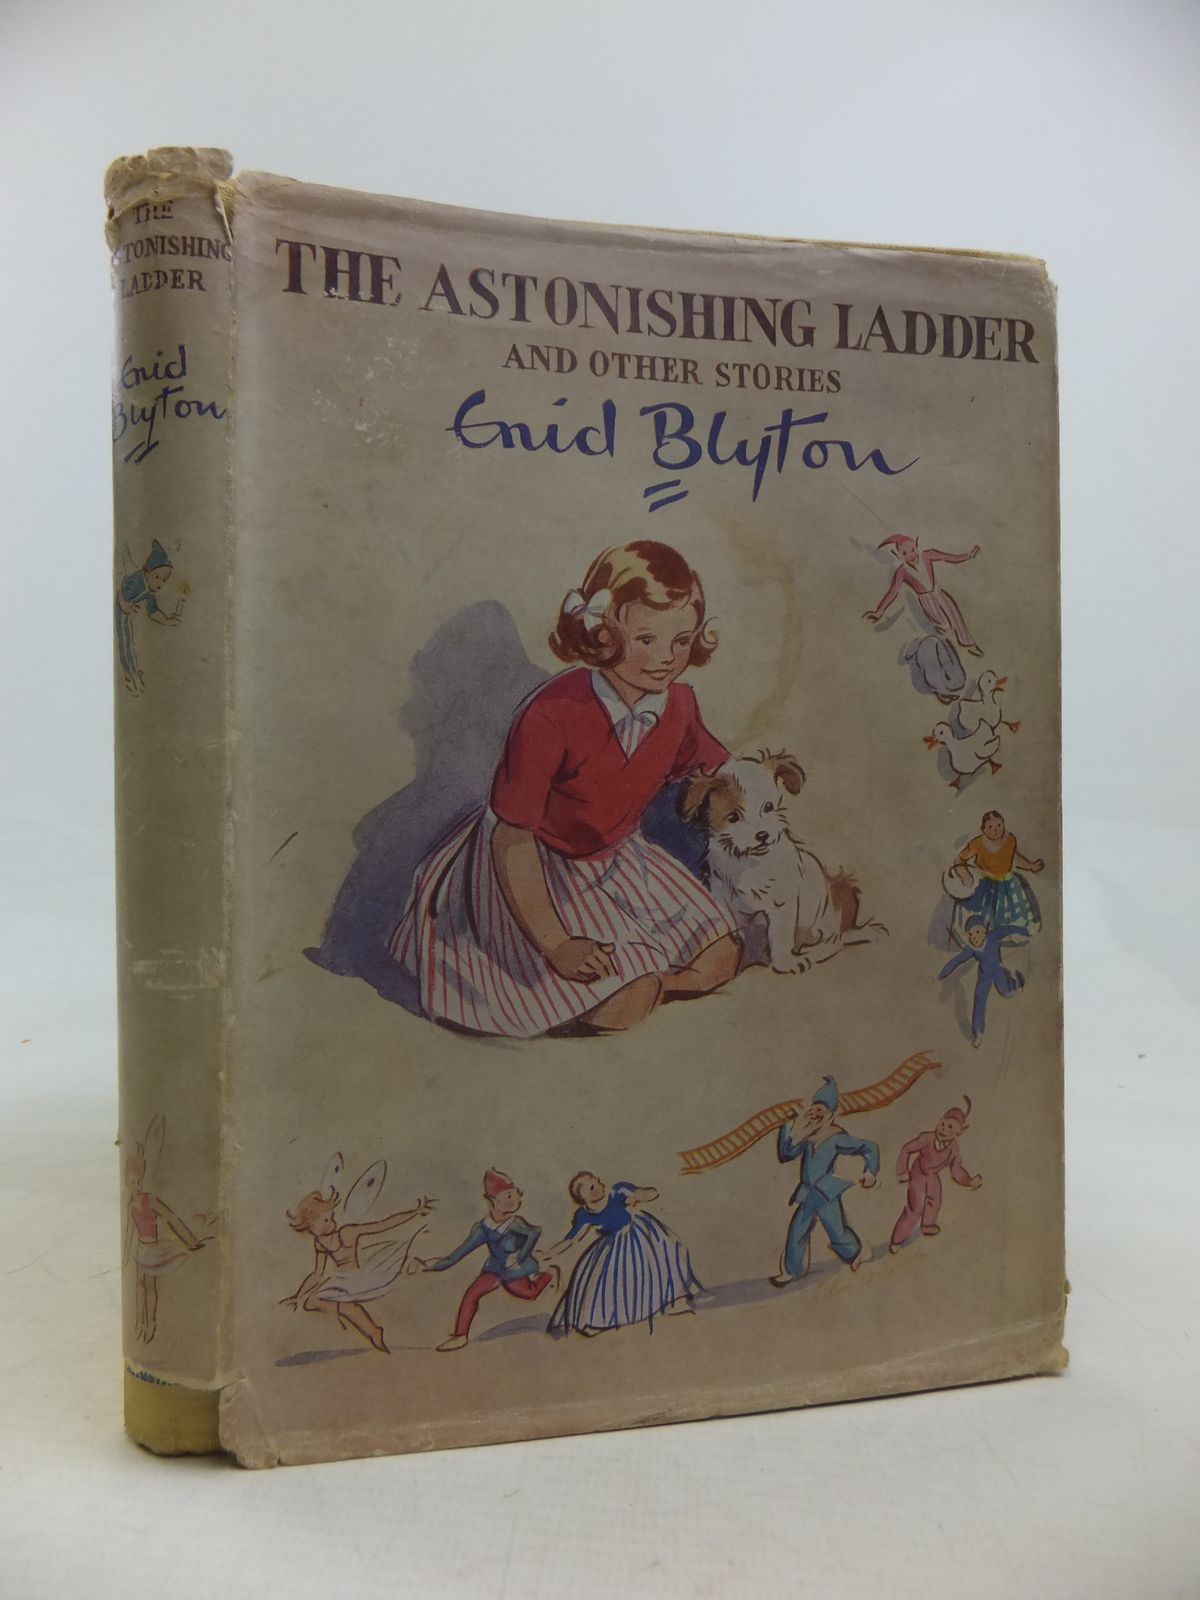 Cover of THE ASTONISHING LADDER by Enid Blyton